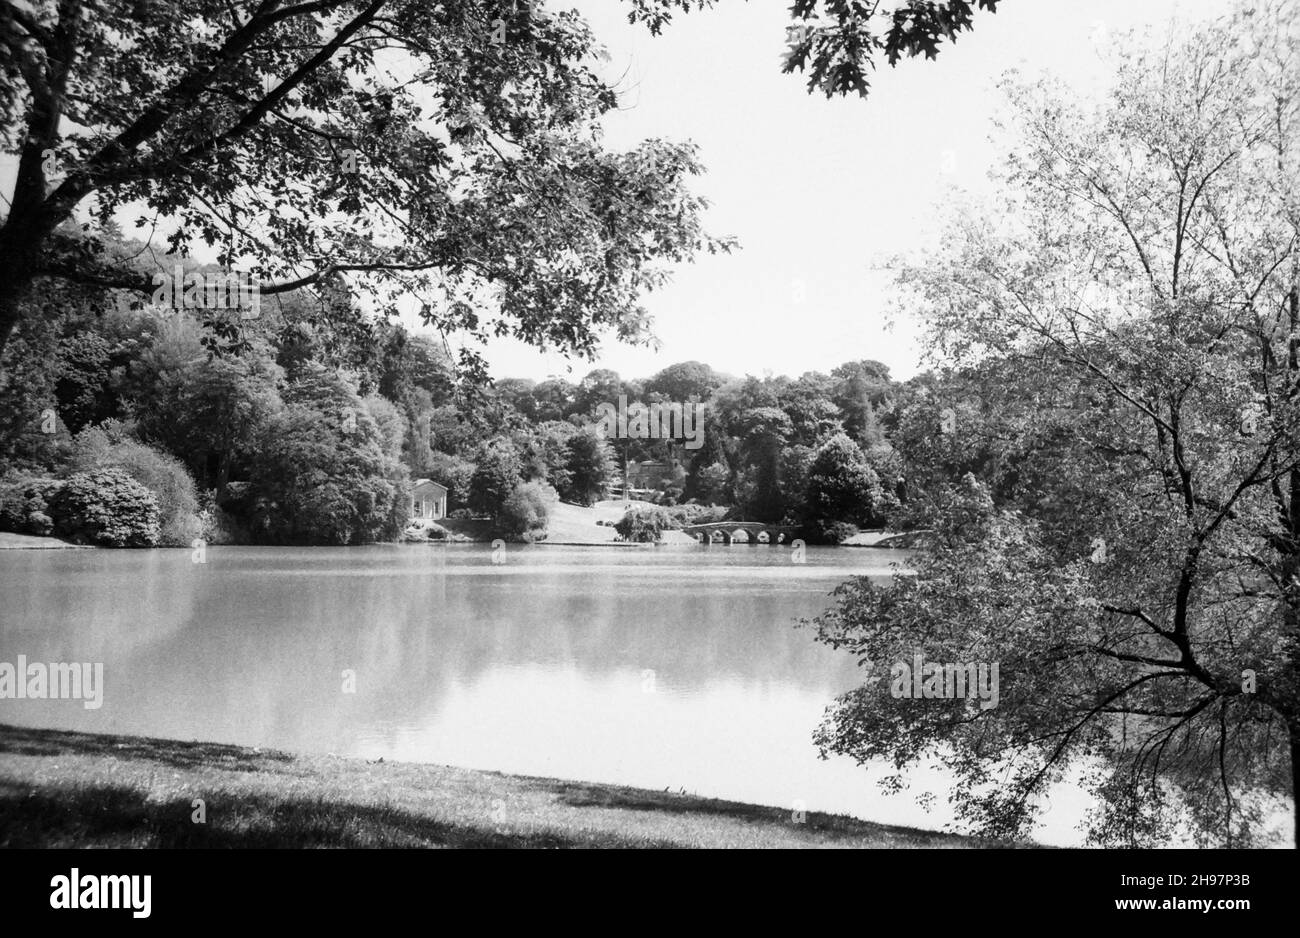 Stourhead Garden, Stourton, Wiltshire, UK, showing the lake, C18th Palladian bridge, the Temple of Flora and the Bristol Cross. Black and white archive film photograph from 1990 Stock Photo